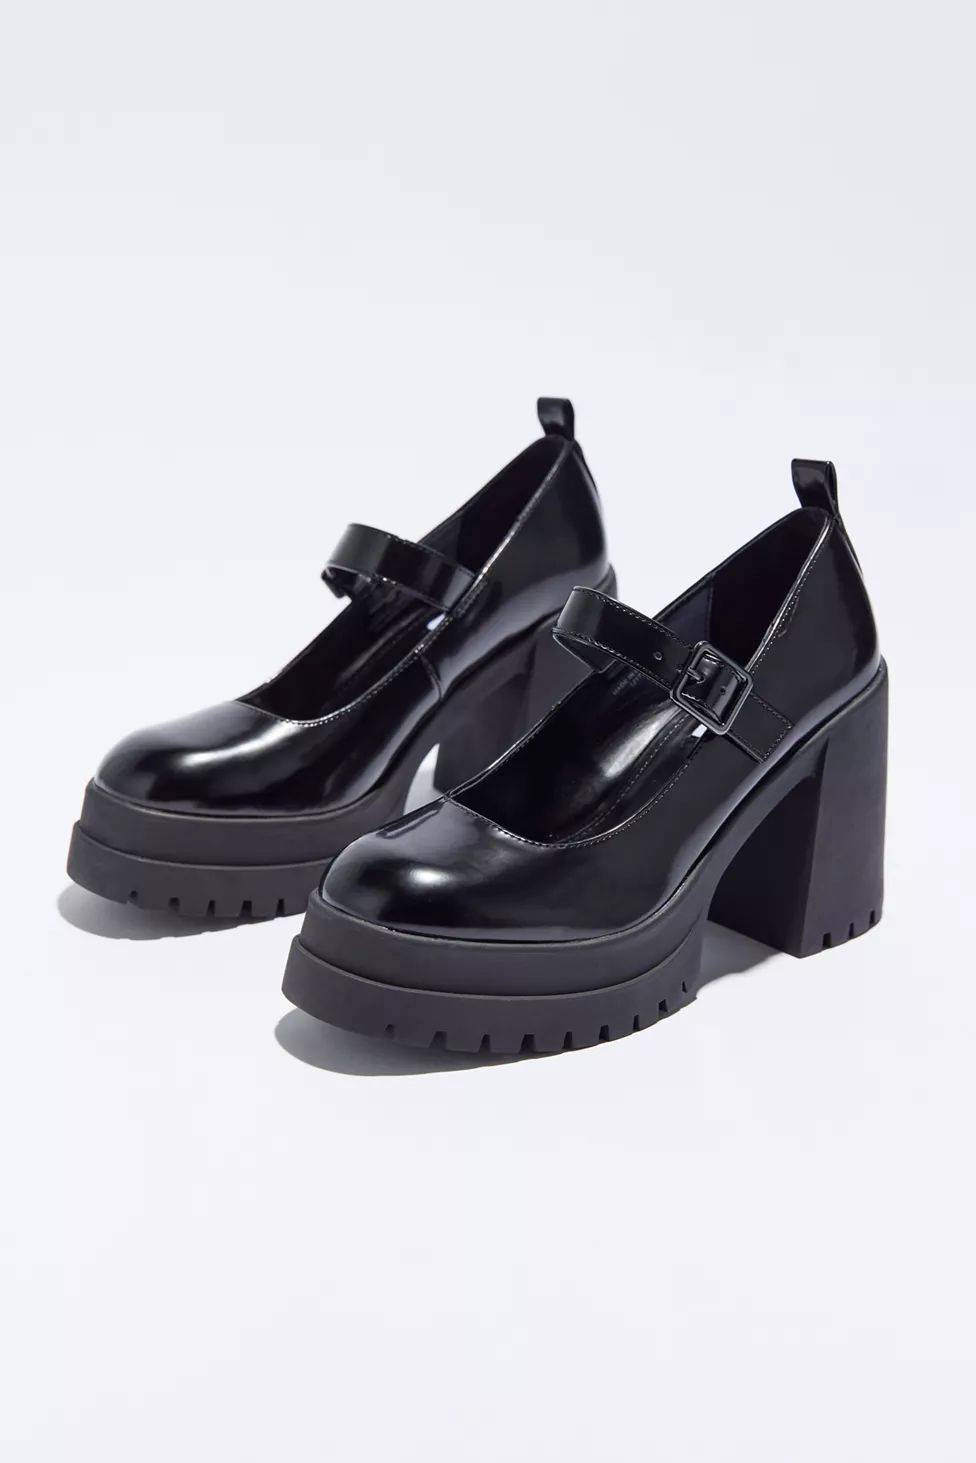 Steve Madden Orsen Treaded Platform Mary Jane | Urban Outfitters (US and RoW)